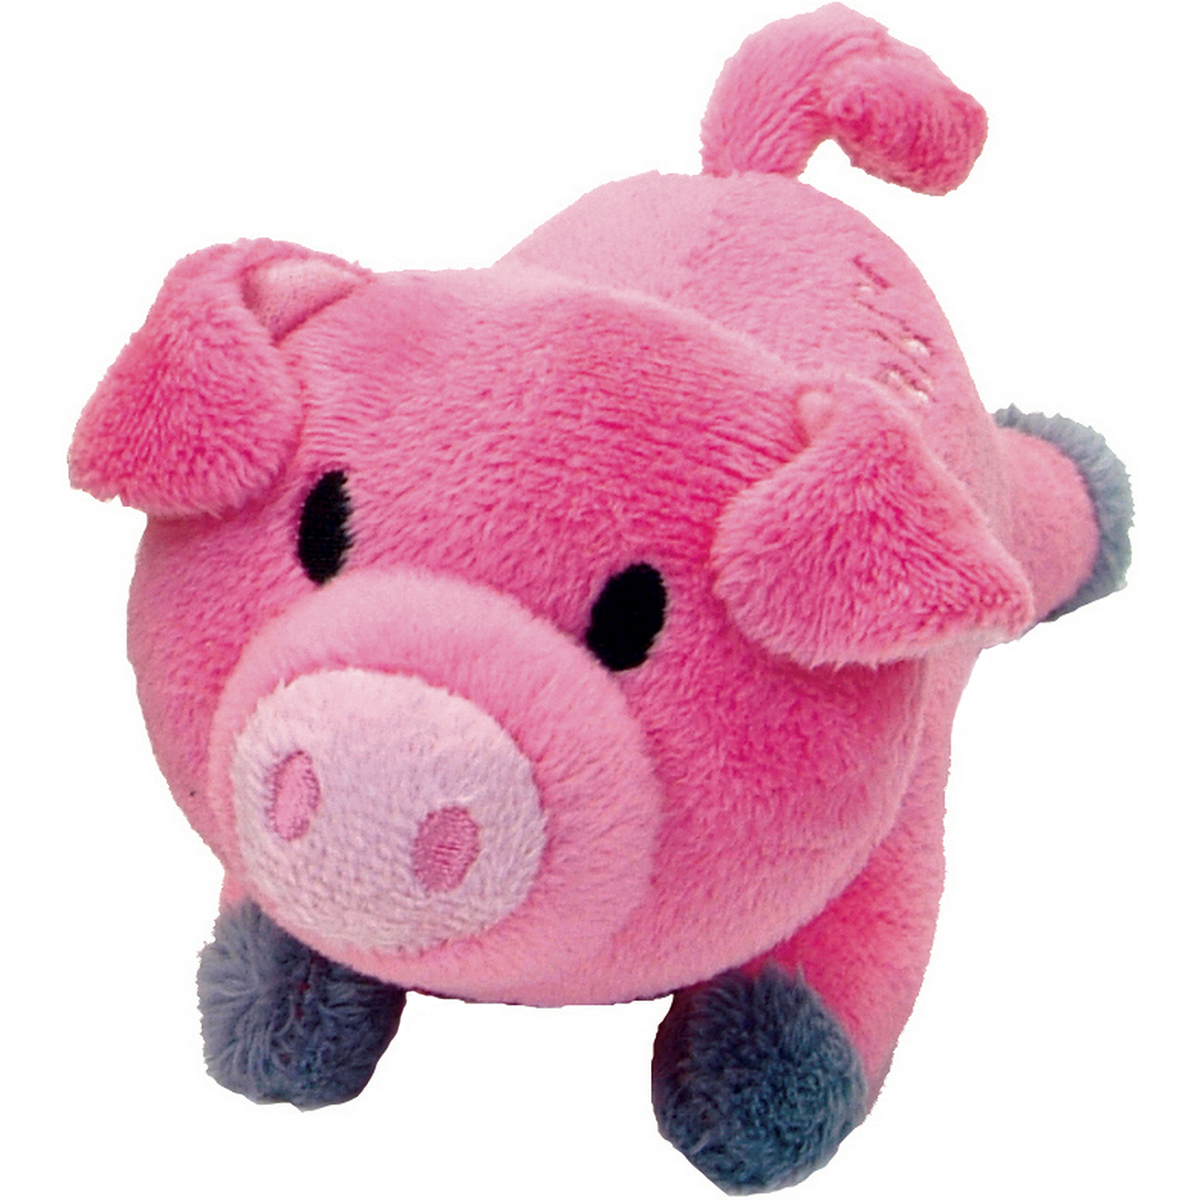 84207-pig 4.5 In. Lil Pals Plush Dog Toy - Pig, Pink